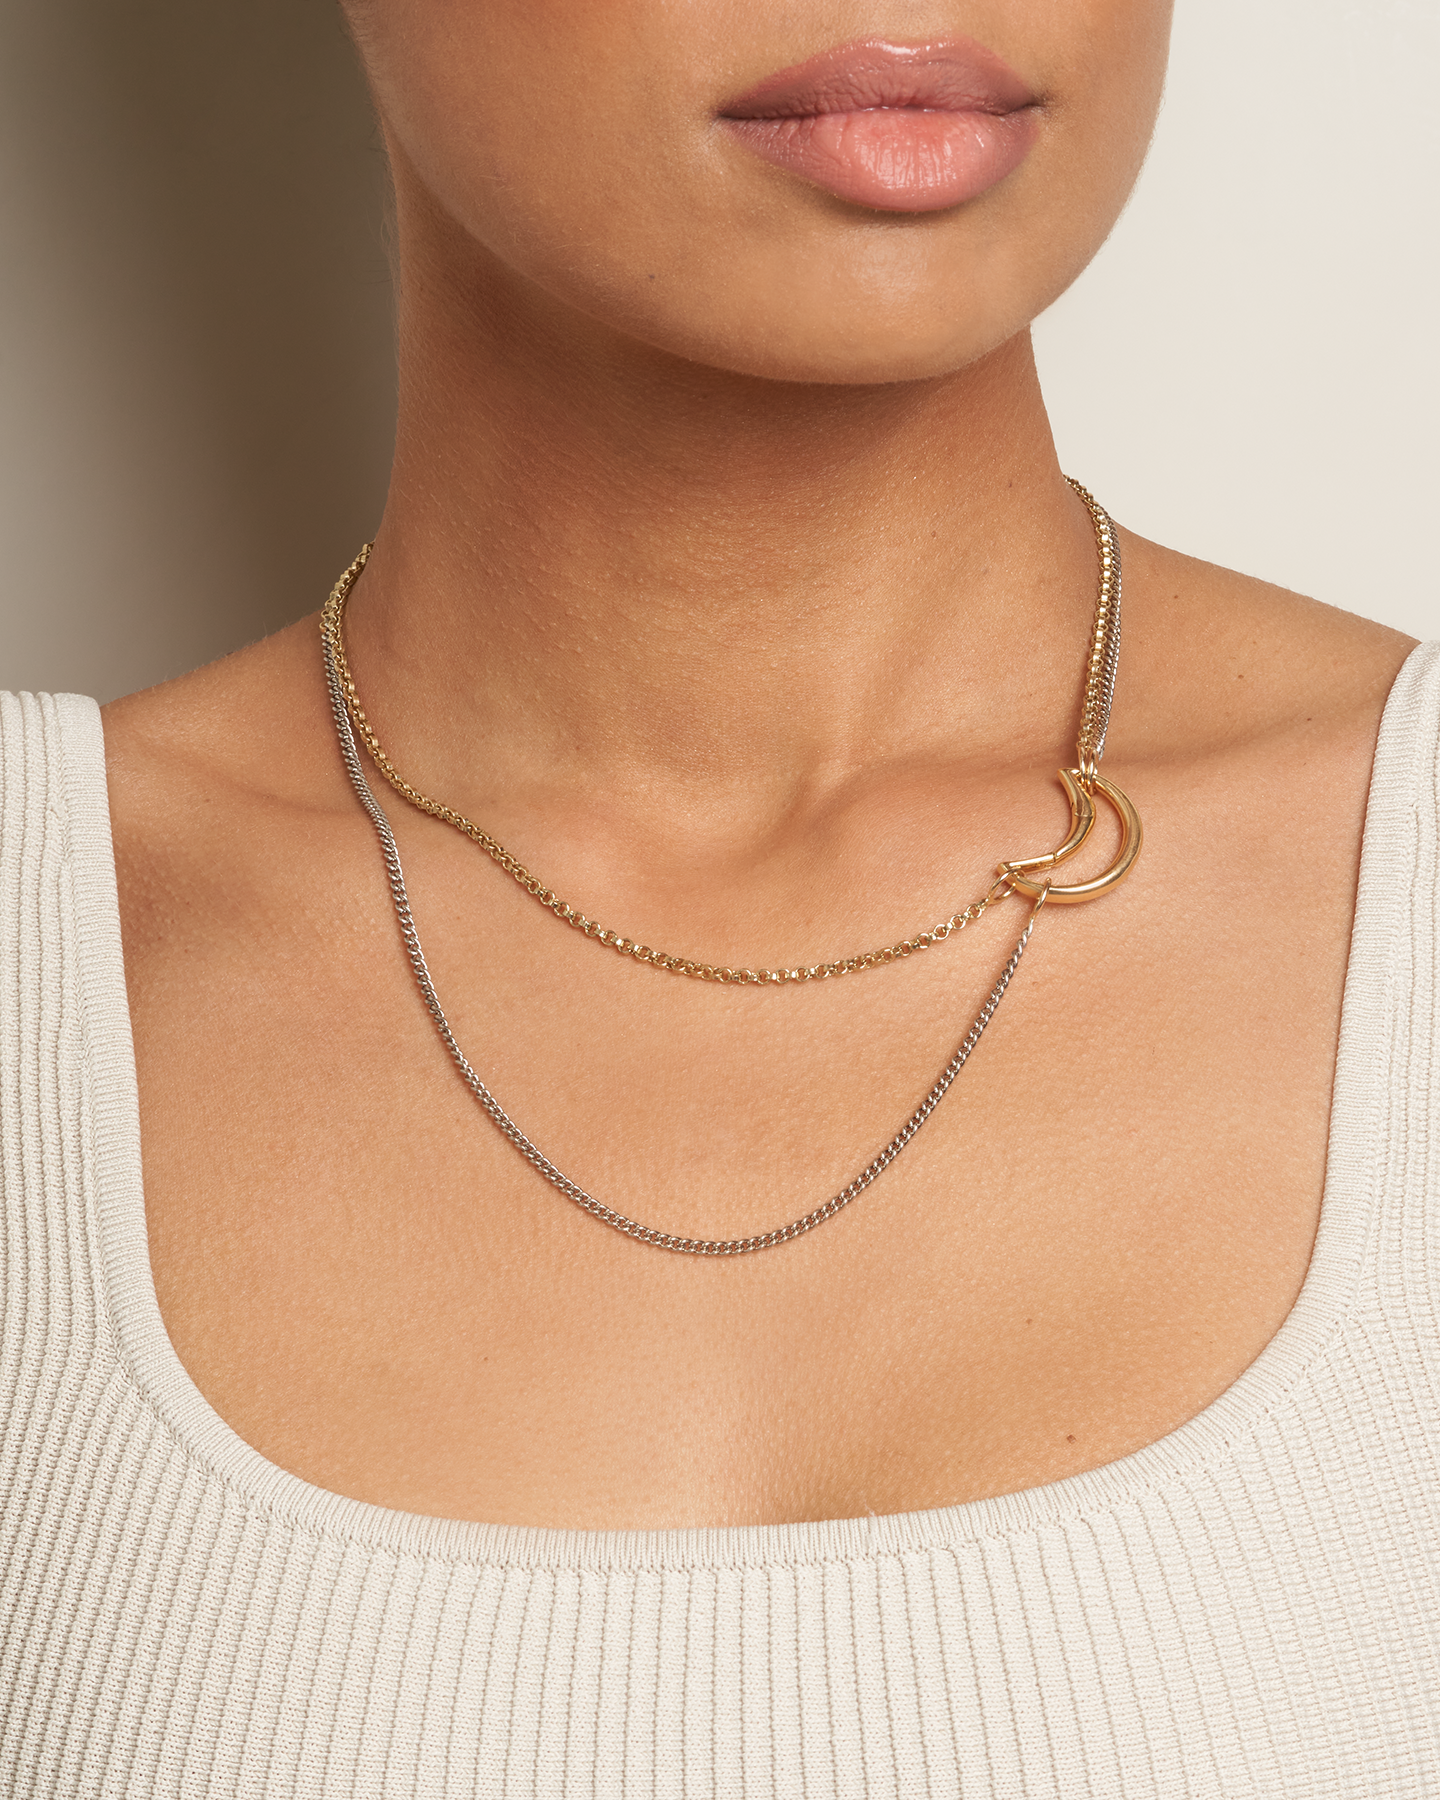 Close up of woman's decolletage wearing gold and silver two tone chain necklace with moon charm on the right side